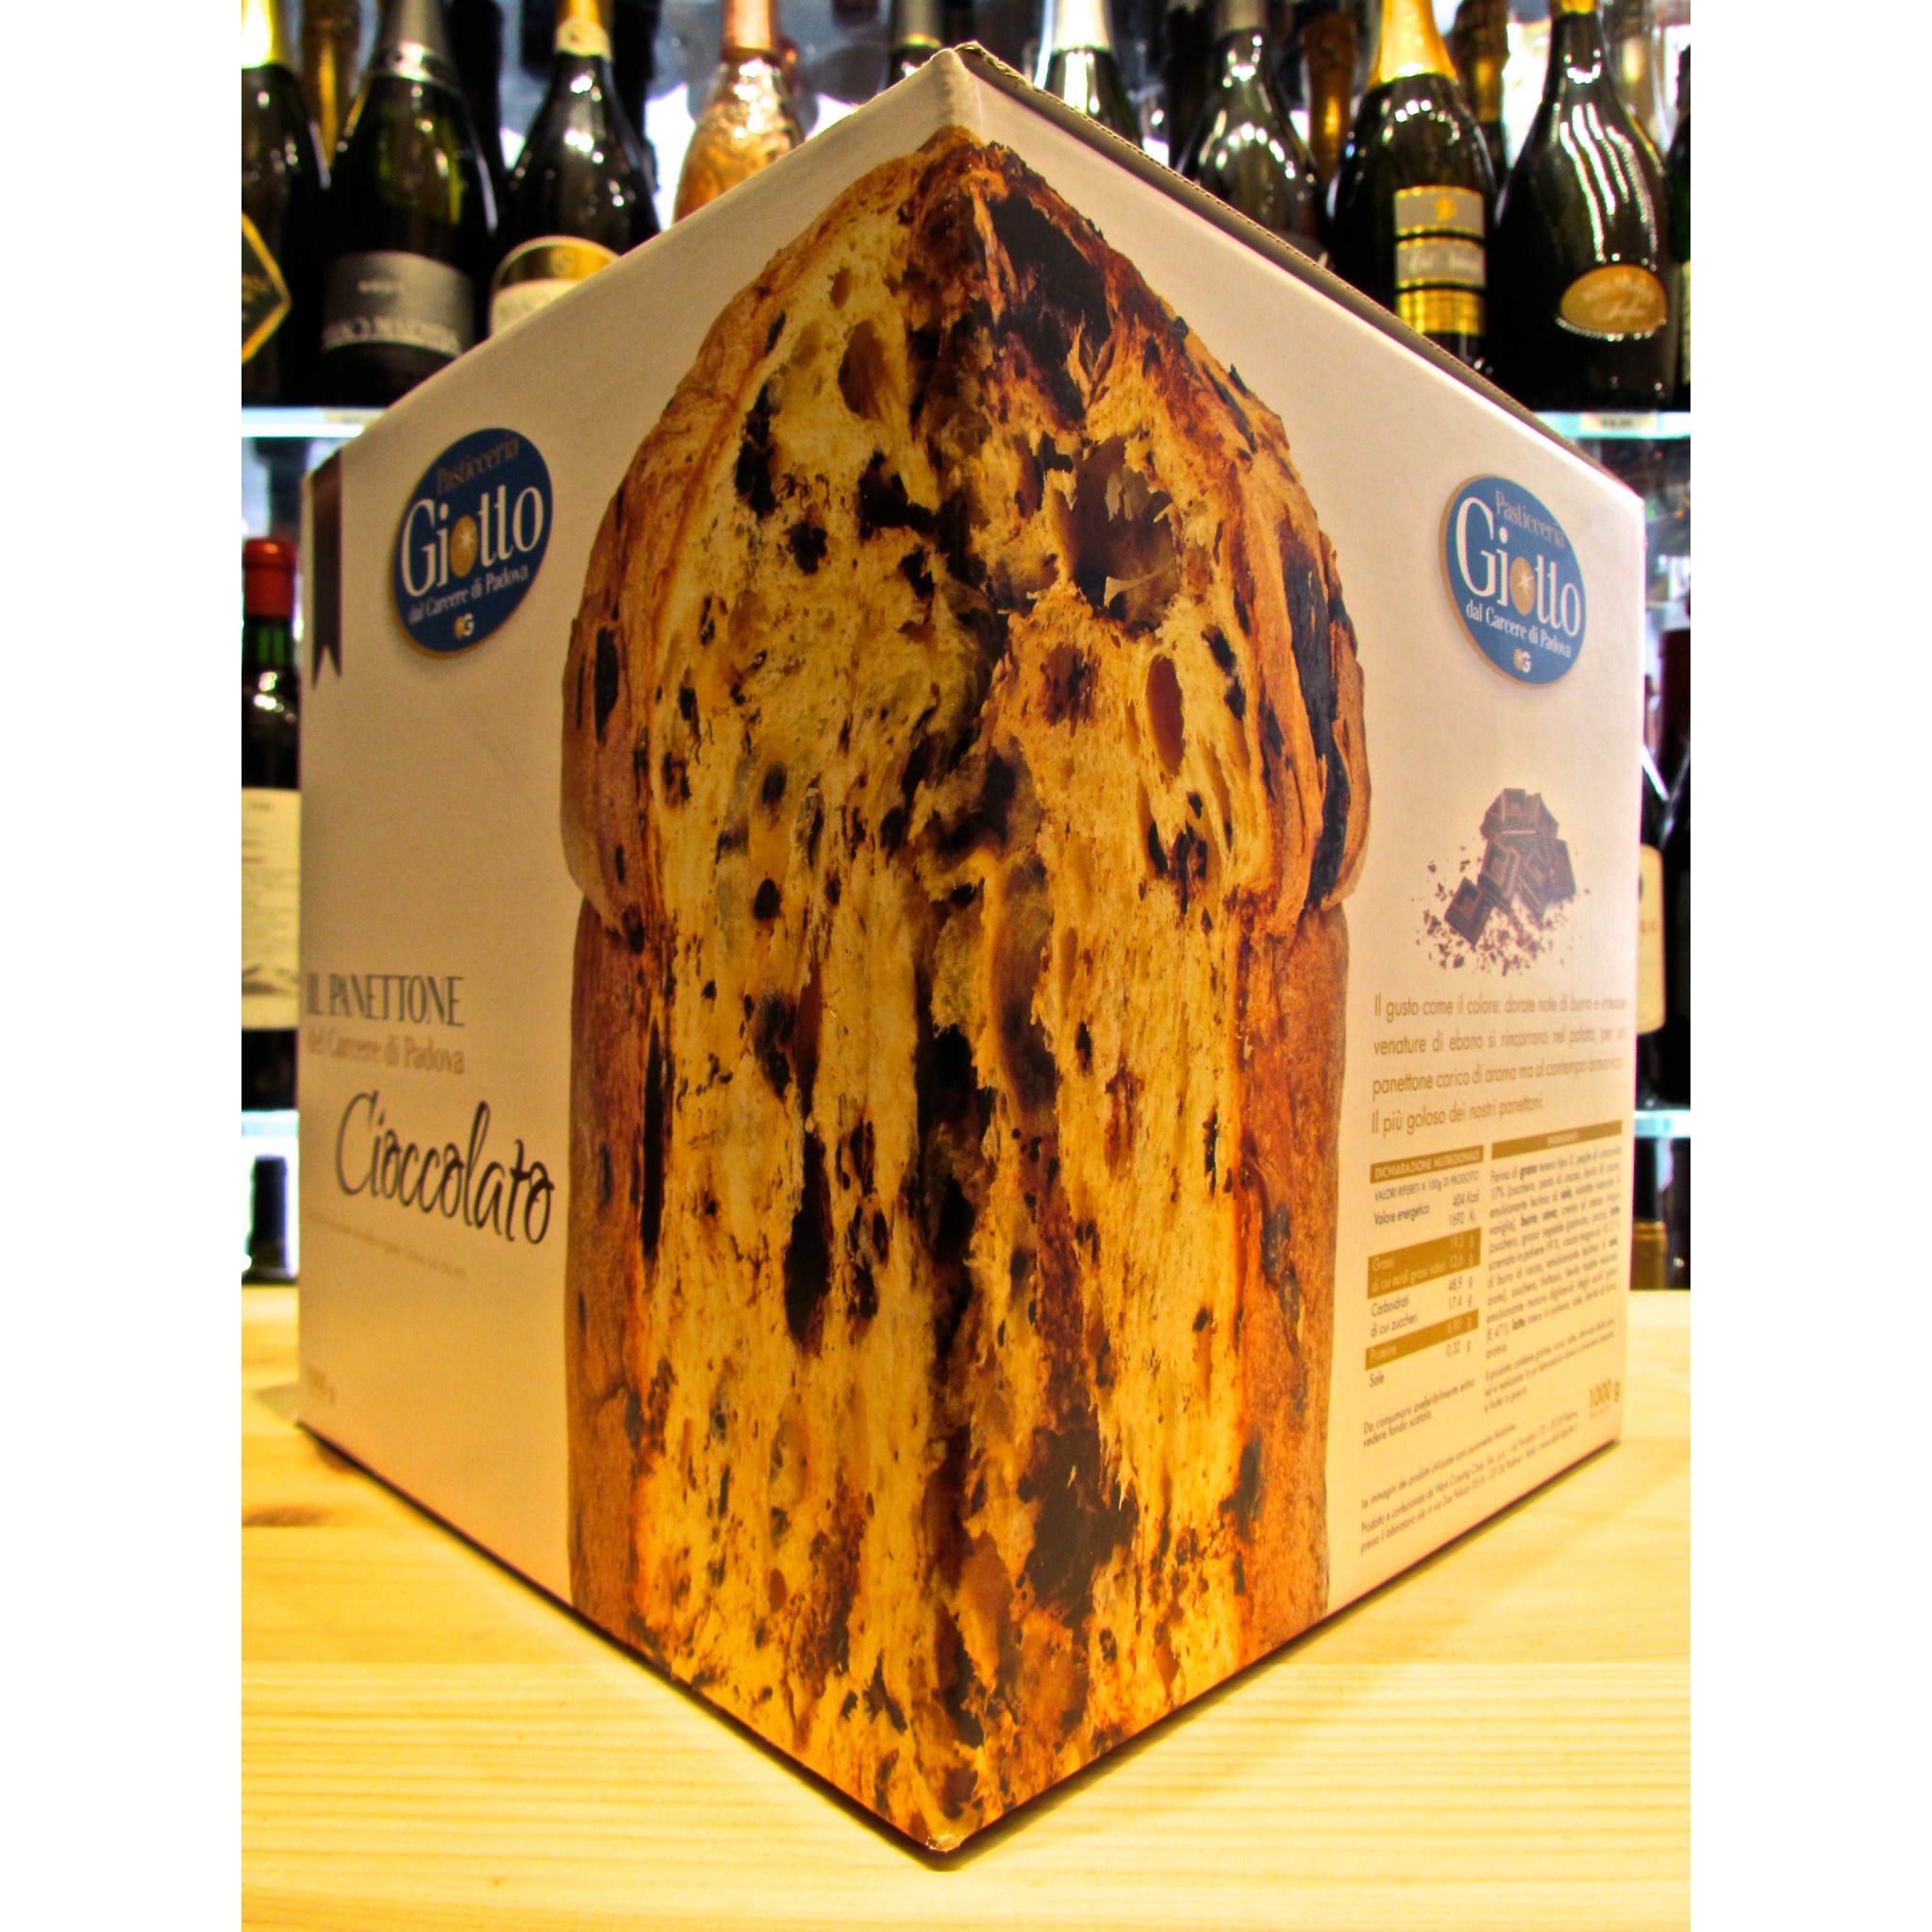 gevangenis klant onkruid Online sales homemade panettone Pastry Giotto from Padua prison Shop online  panettone cakes Giotto Padova